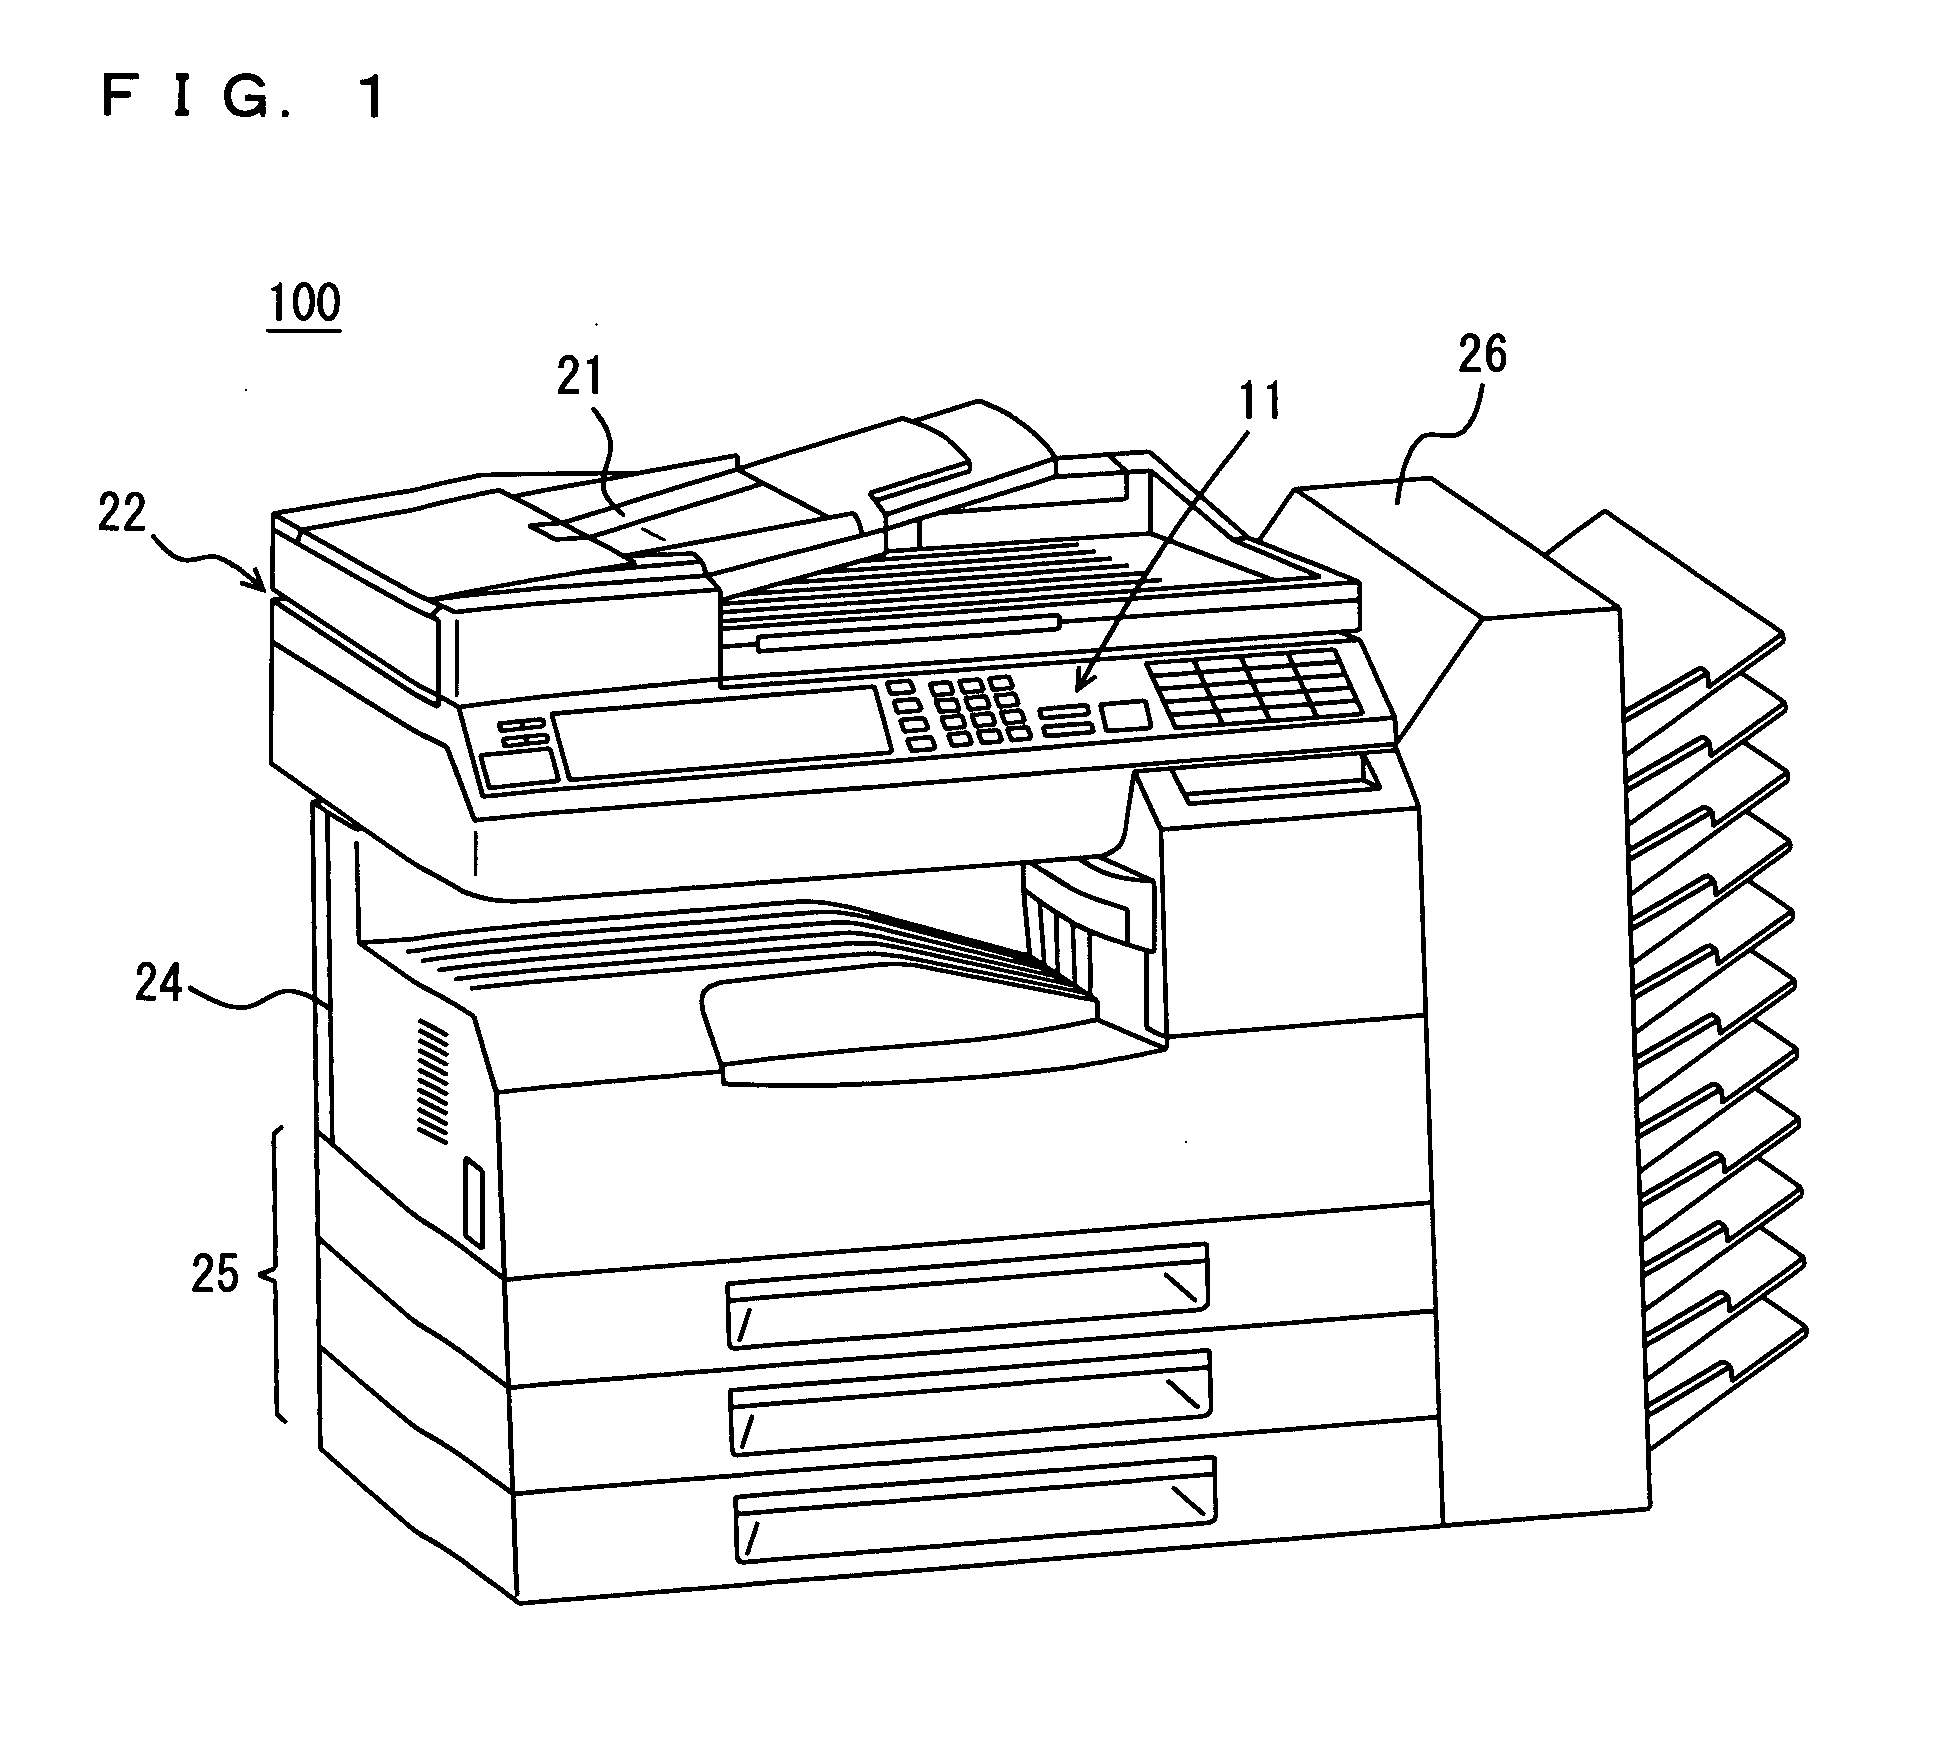 Image forming apparatus suitable for recycling sheets of paper with images formed thereon, and method and program product for adding recycling information